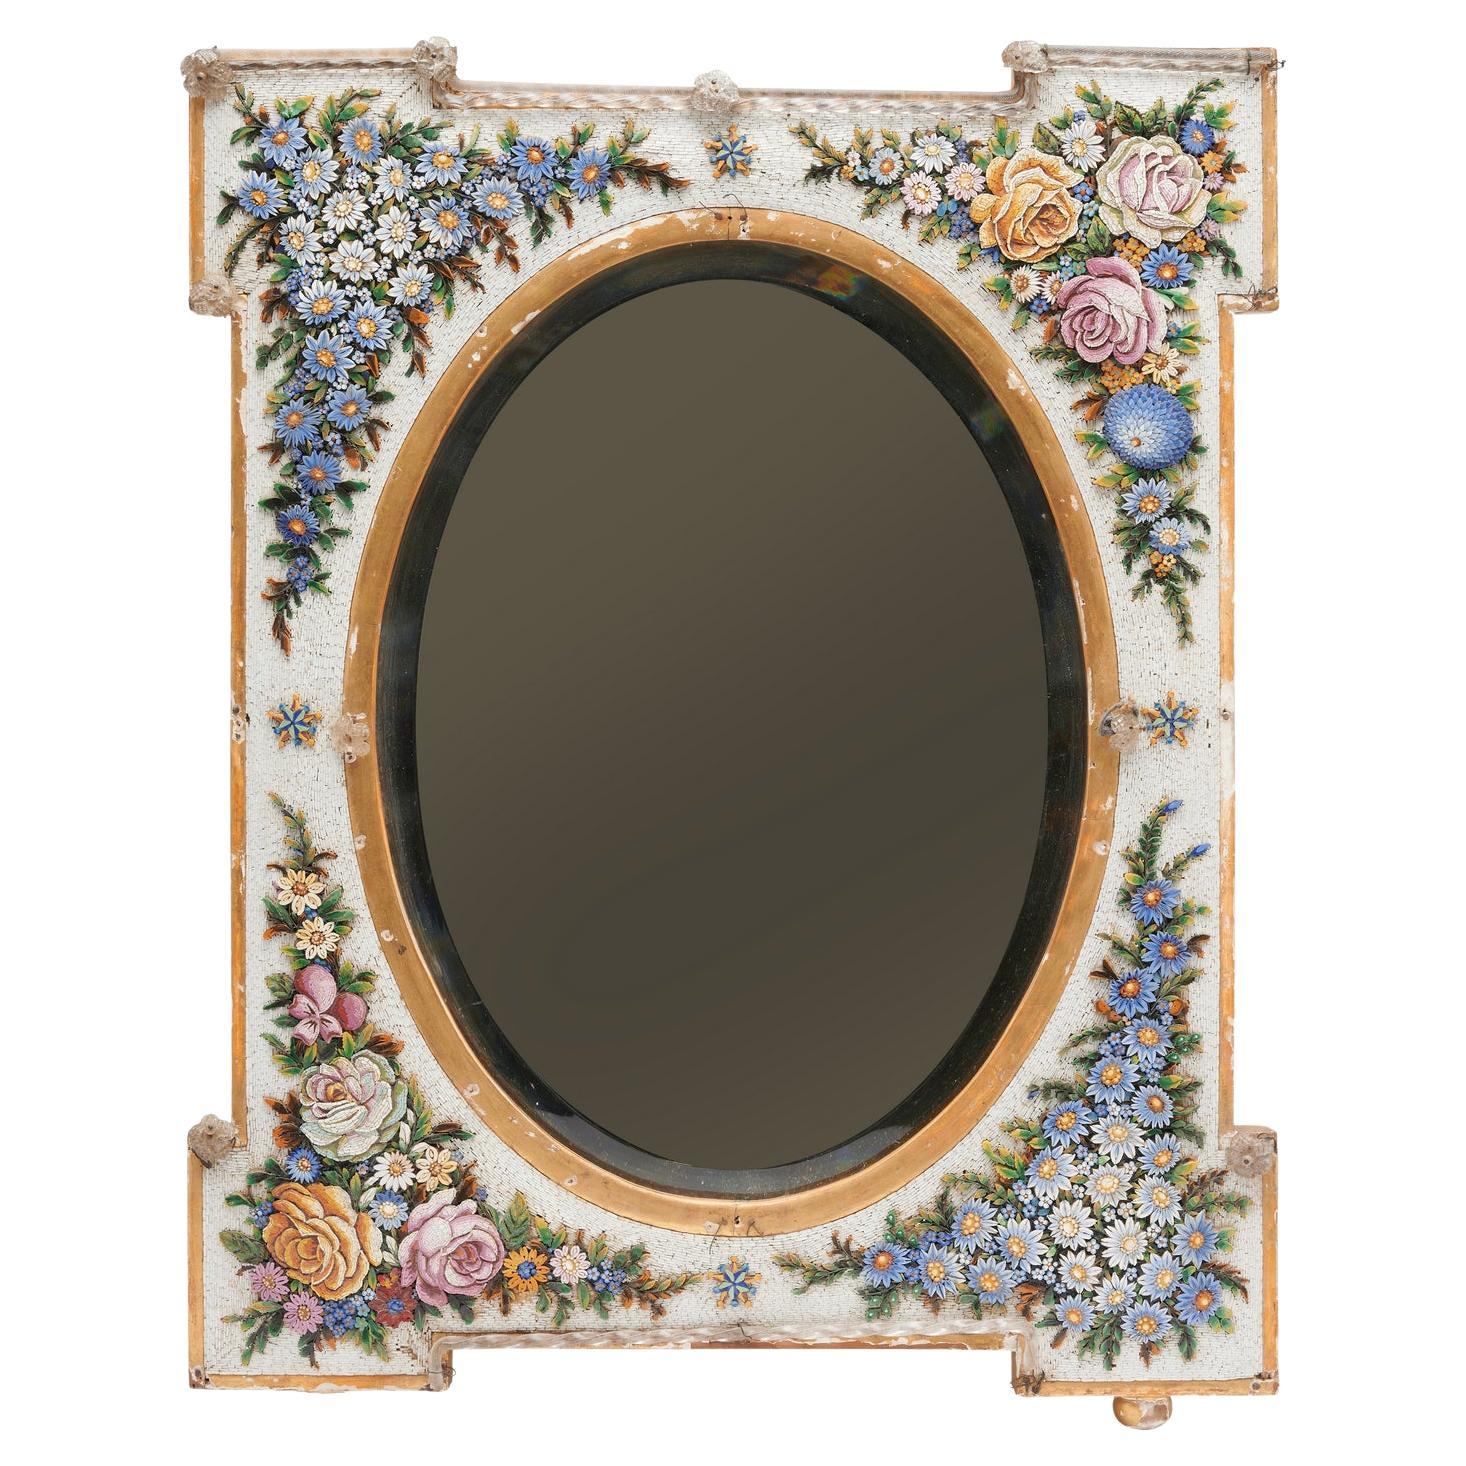 A Venetian Micromosaic-Framed Mirror, Late 19th century For Sale